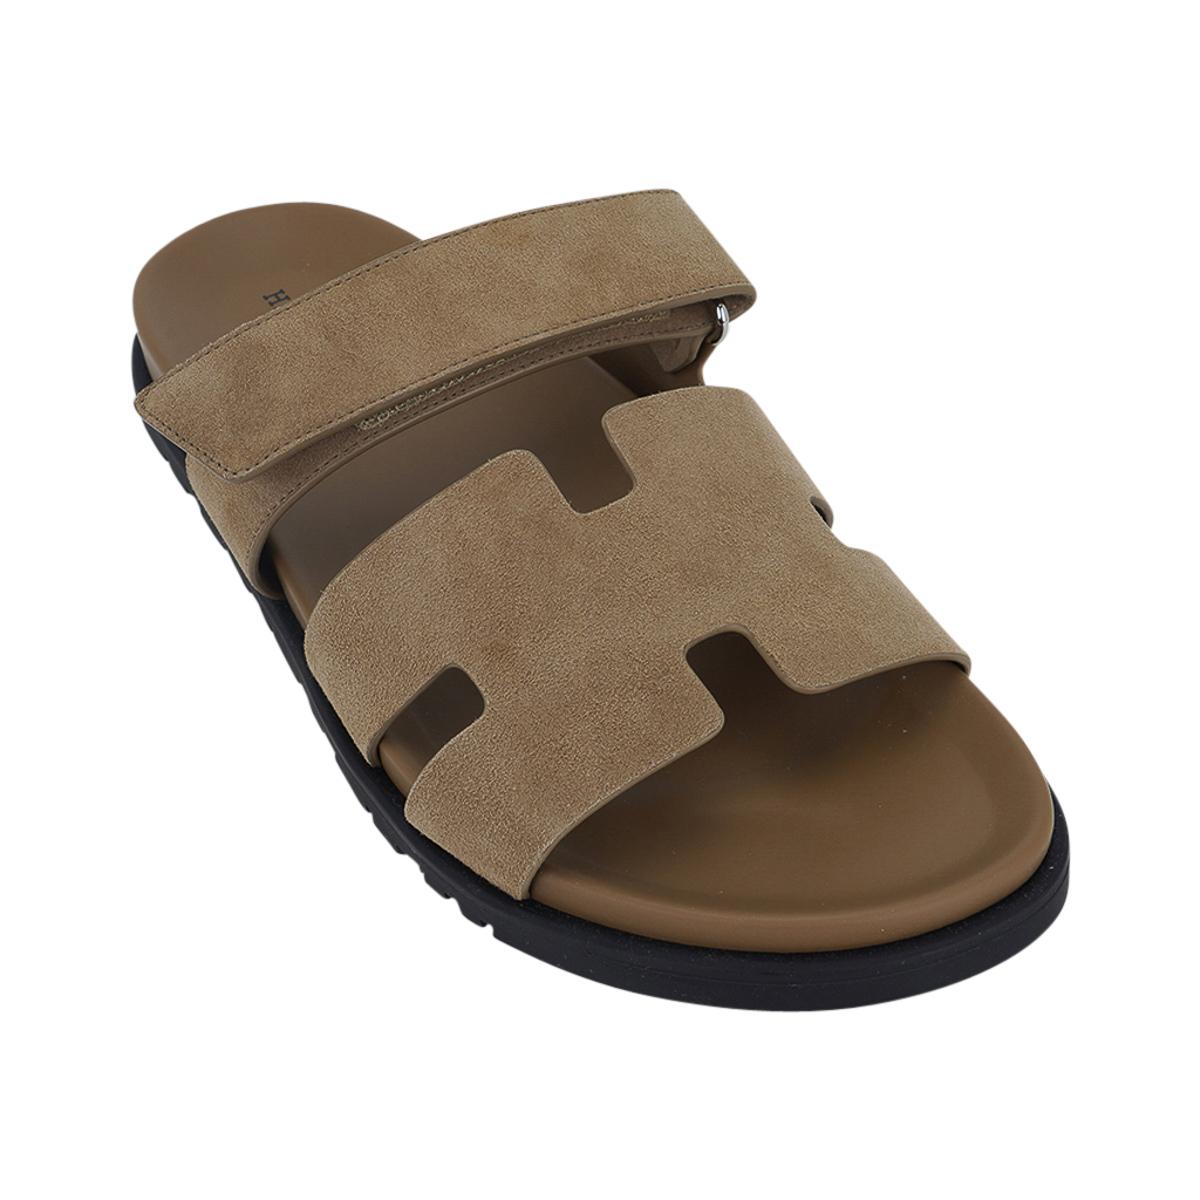 Mightychic offers a pair of limited edition Hermes Men's Chypre sandal featured in Tan.
Beautiful fawn tan hue suede with matching anatomical insole and H embossed Black rubber sole.
Strap across foot is adjustable with velcro closure.
Comes with